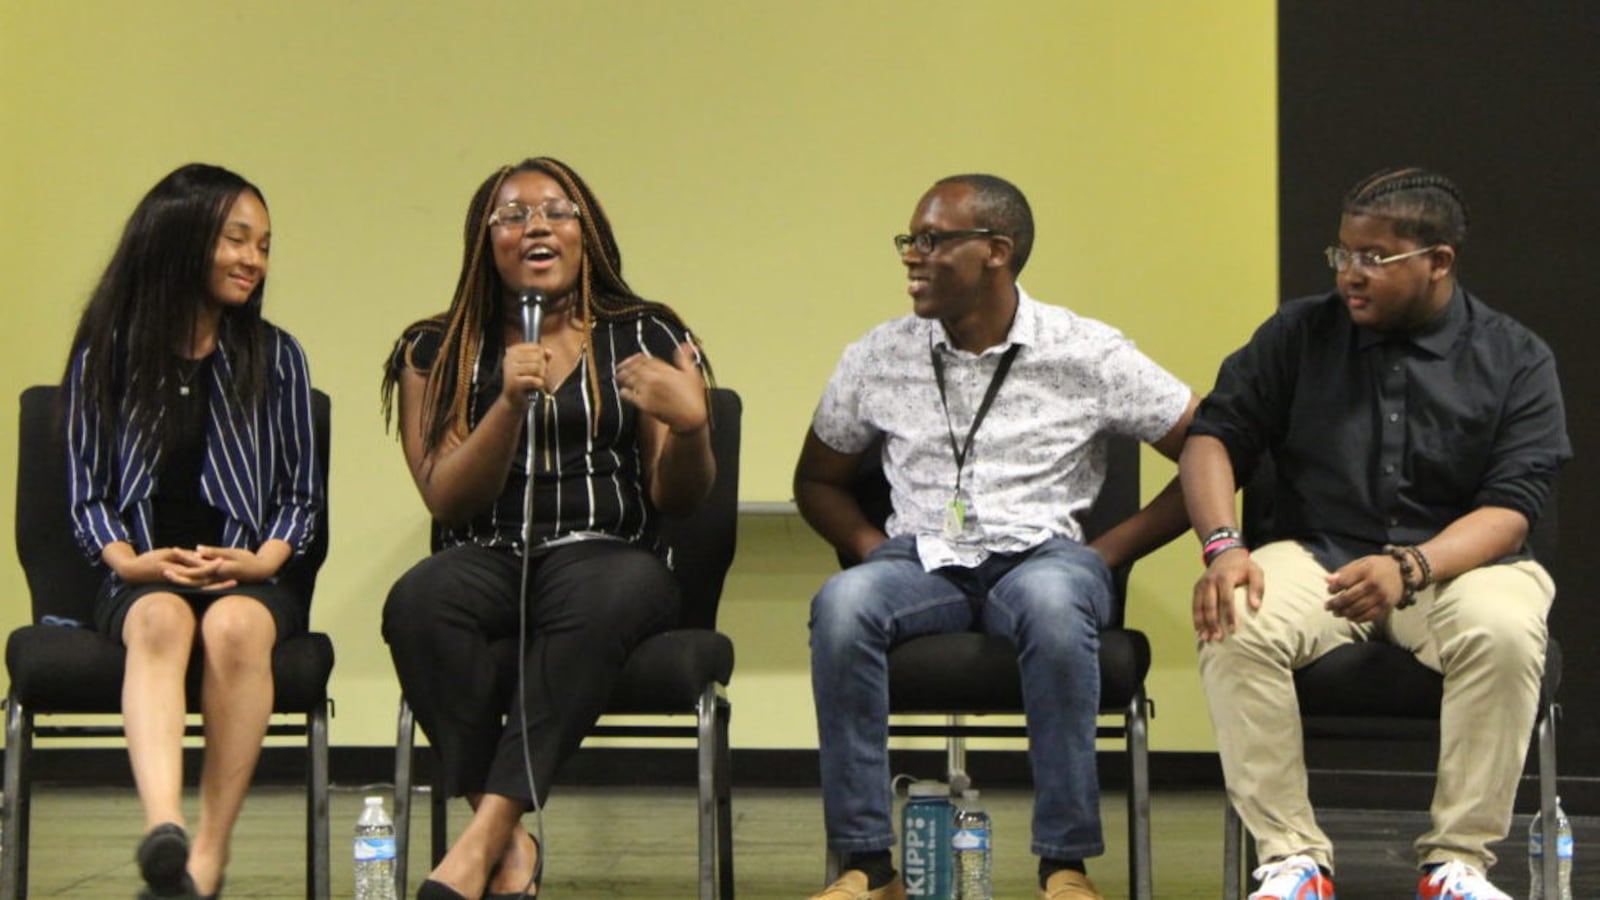 Freedom Prep student Destiny Dangerfield talks alongside Asiah Hayes, Detario Yancey, and Evan Walsh at a panel discussion for TFA Memphis trainees.